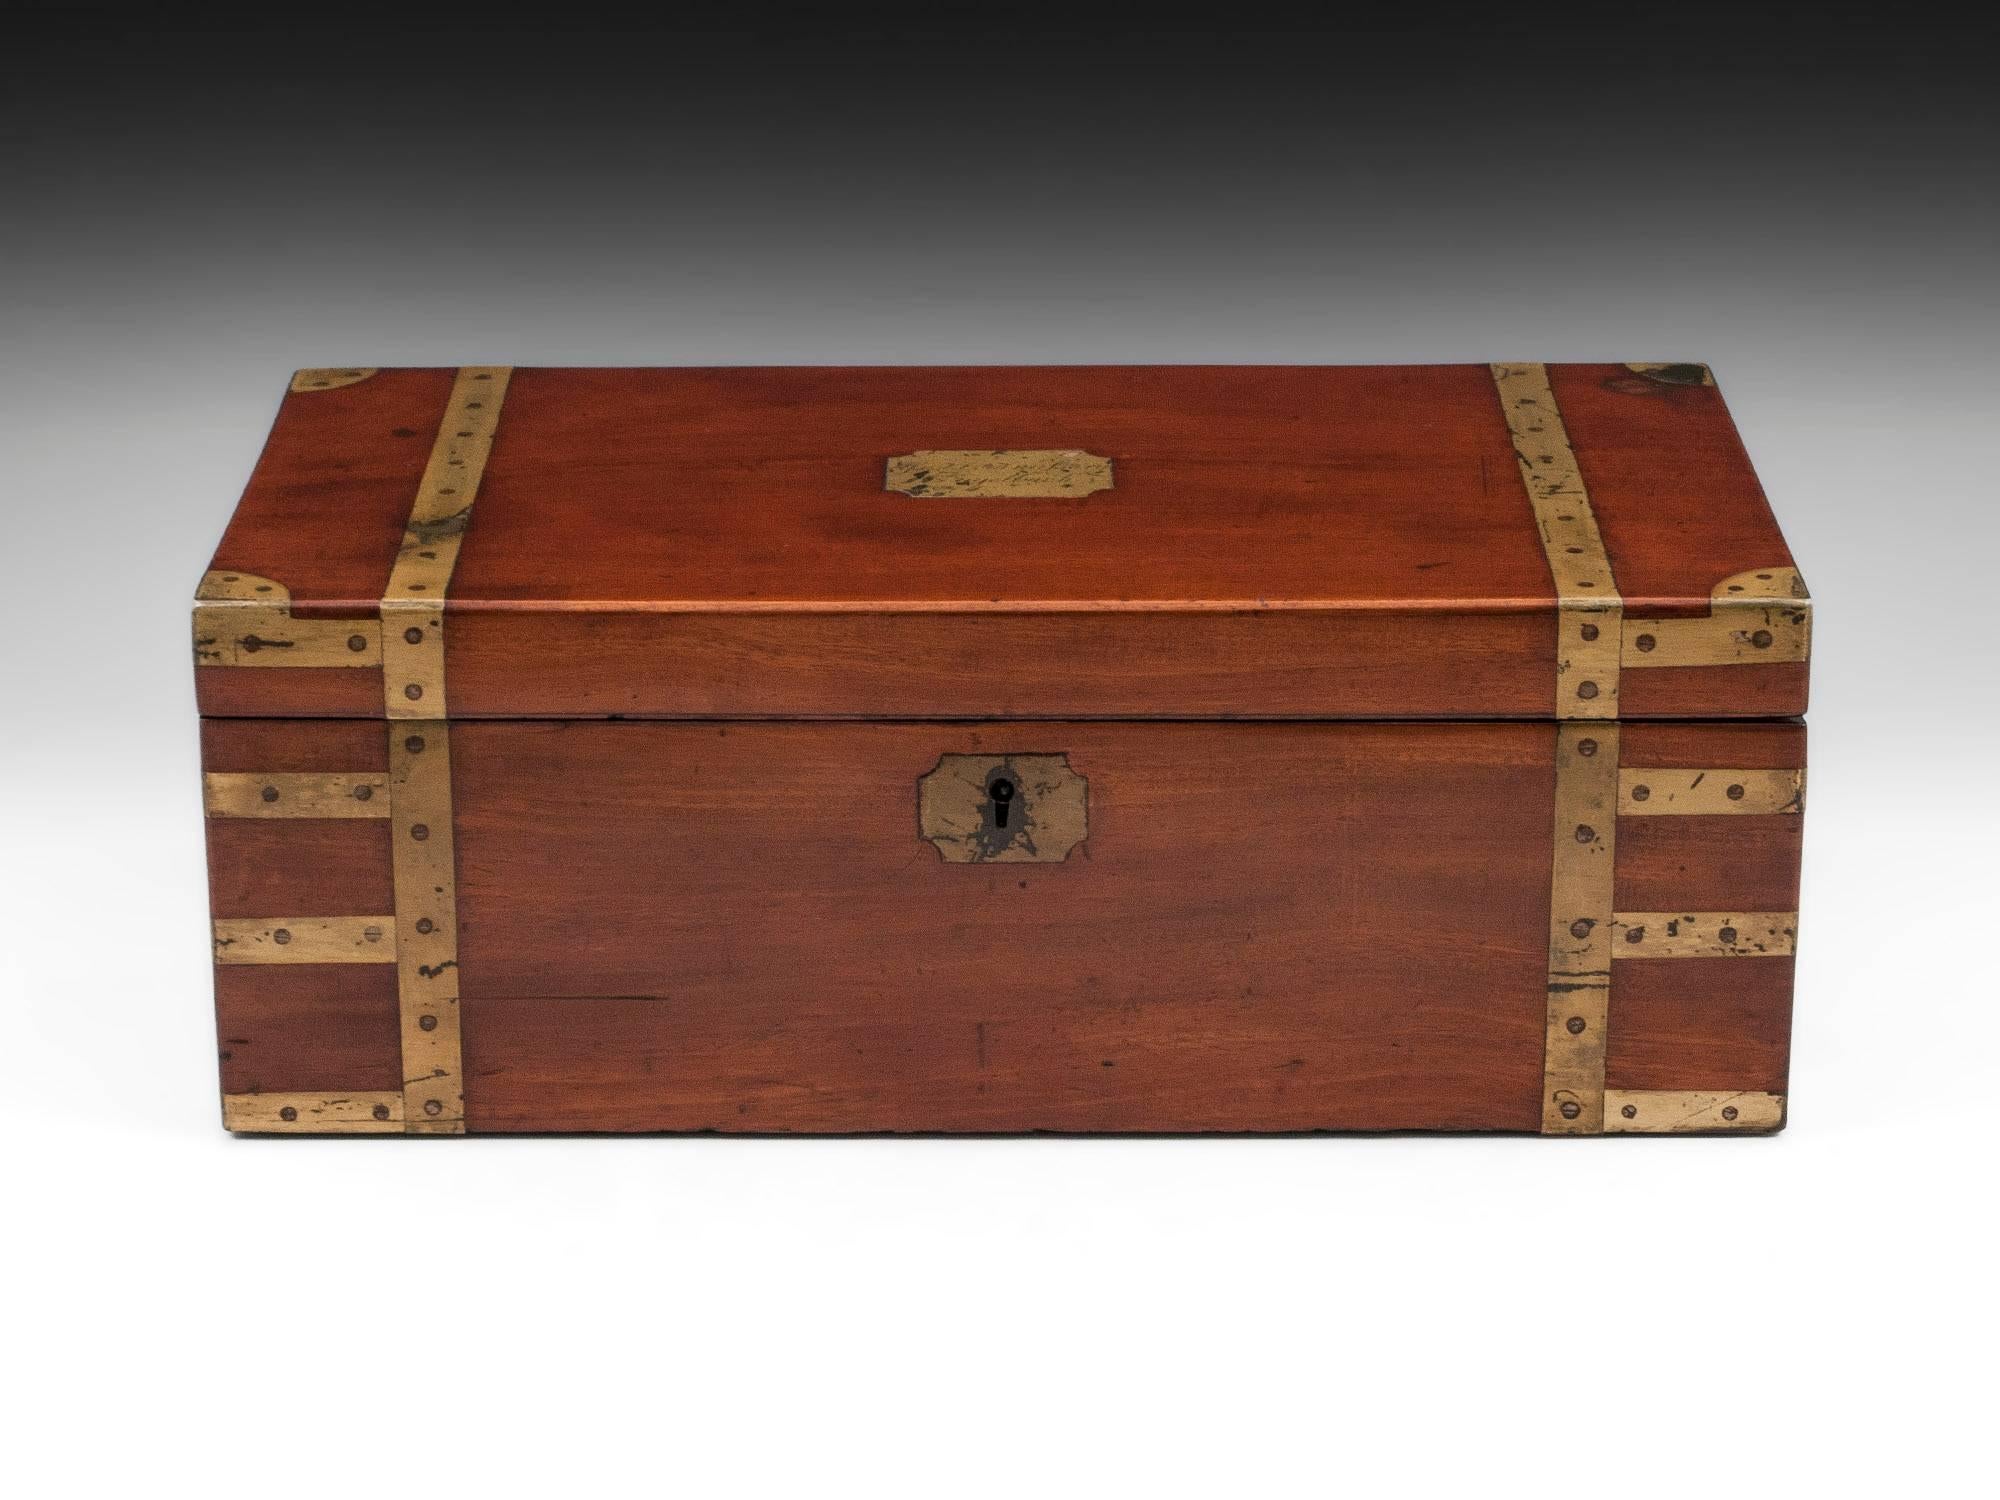 Georgian military Campaign box in solid mahogany with screwed brass strapping and flush-fitting side-handles and side drawer. Solid and functional to the outside, the real interest in this box lies in its interior. It retains its original candle